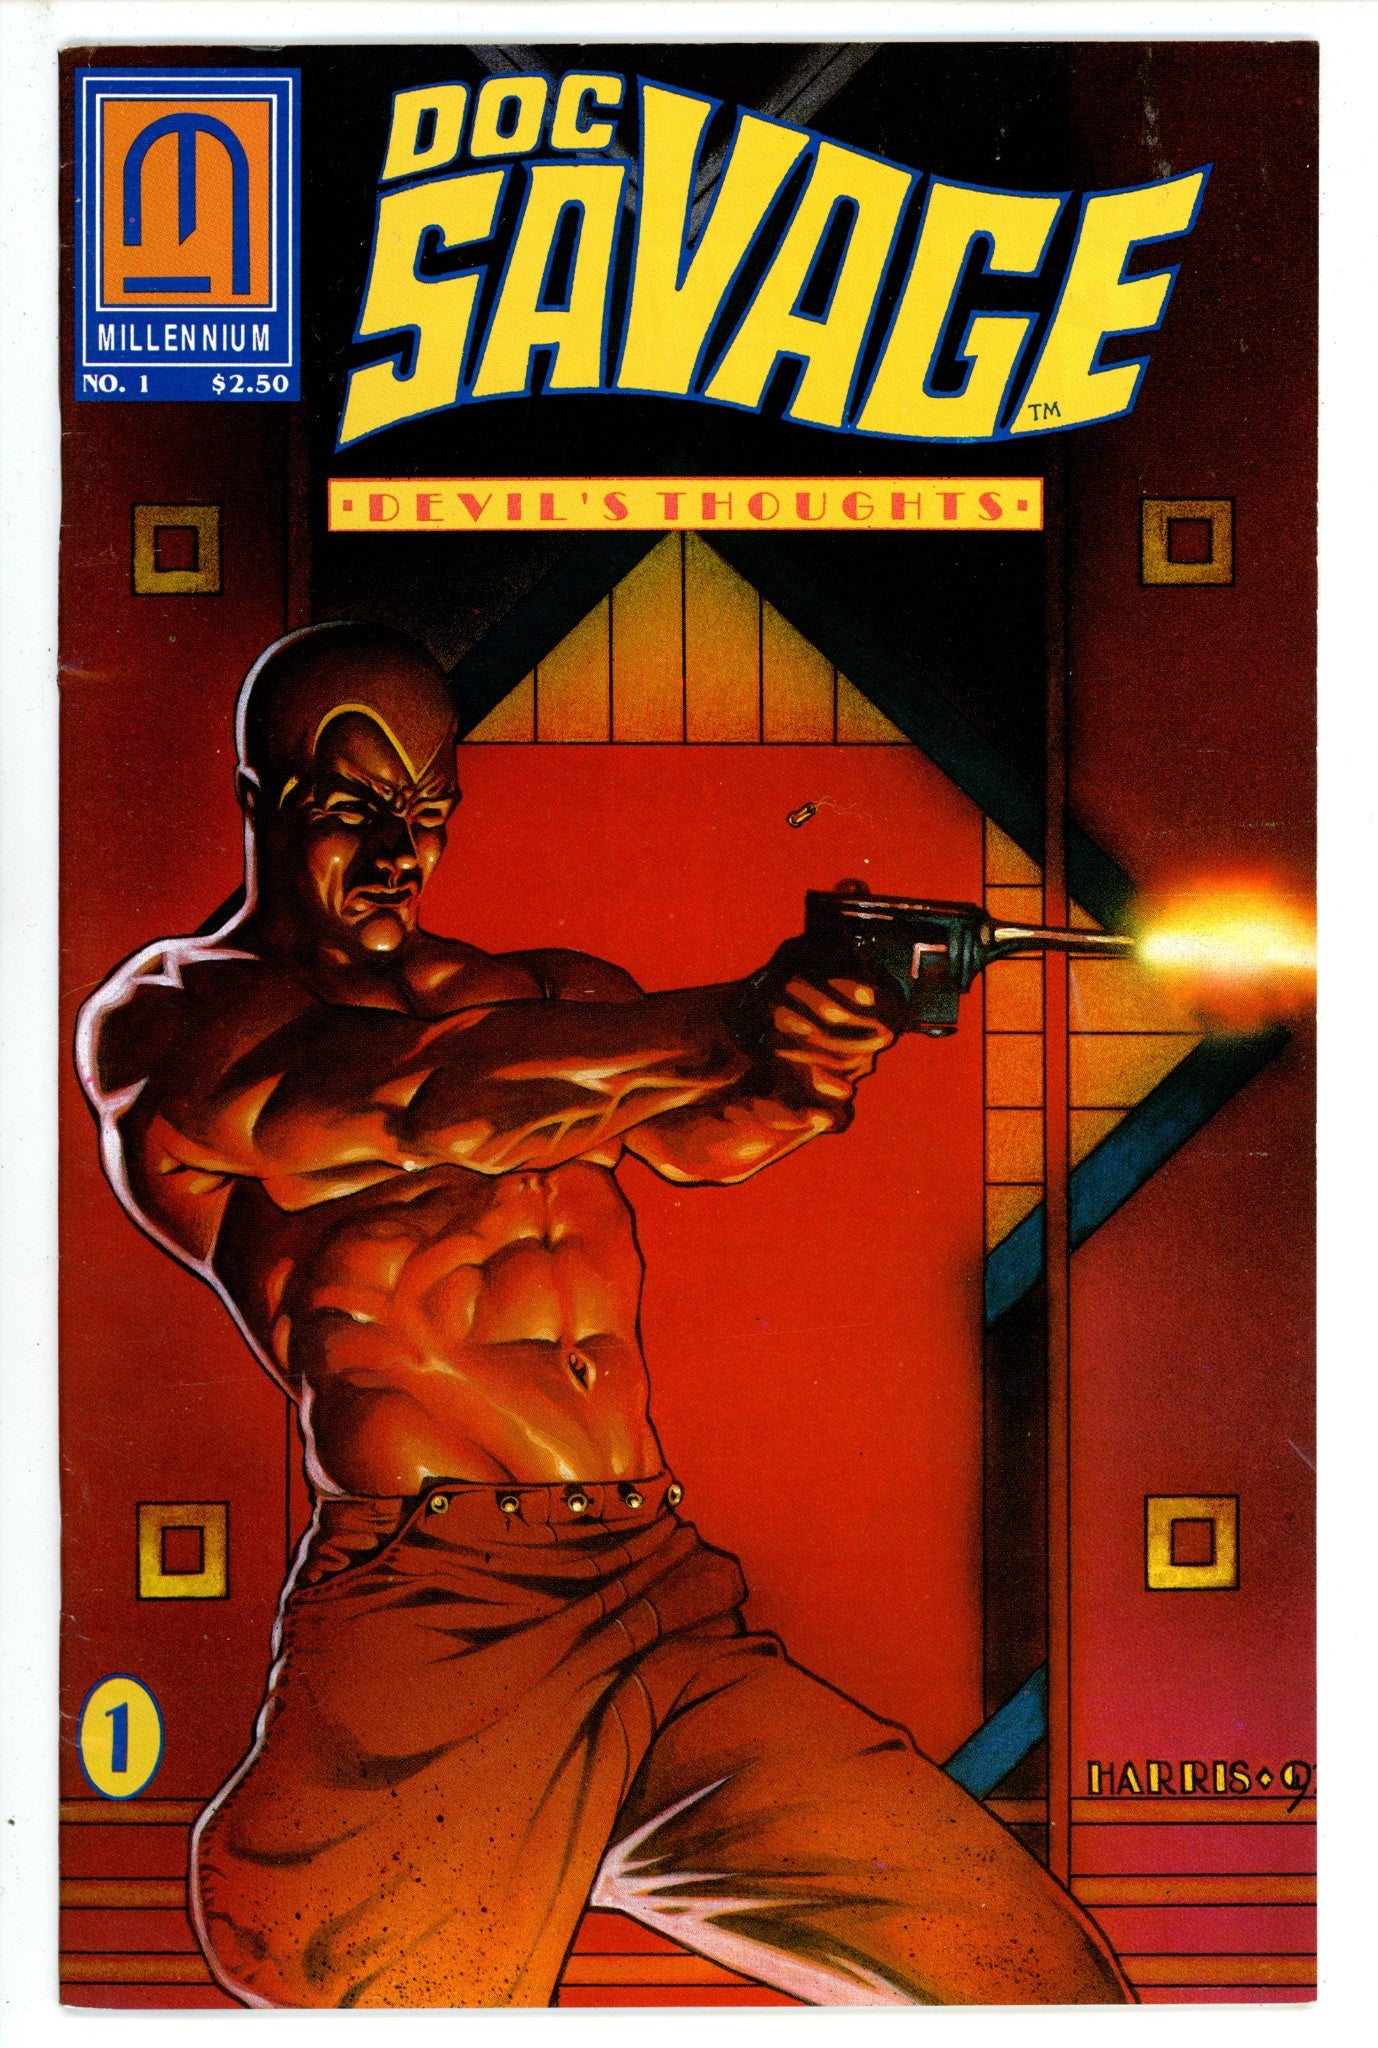 Doc Savage: Devil's Thoughts 1 (1991)